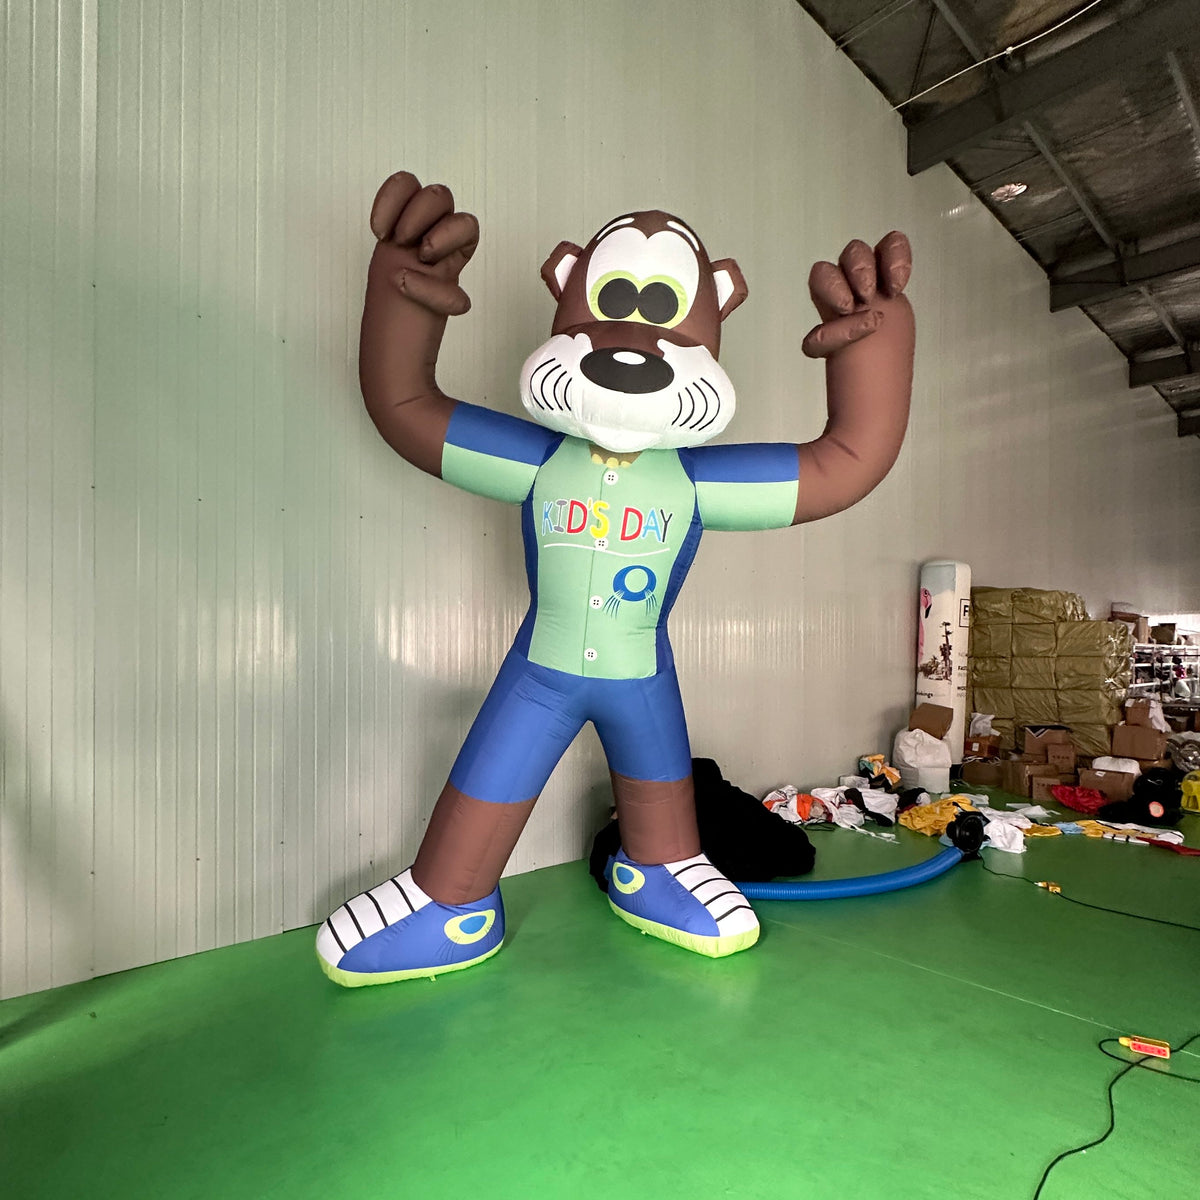 kids day giant inflatable